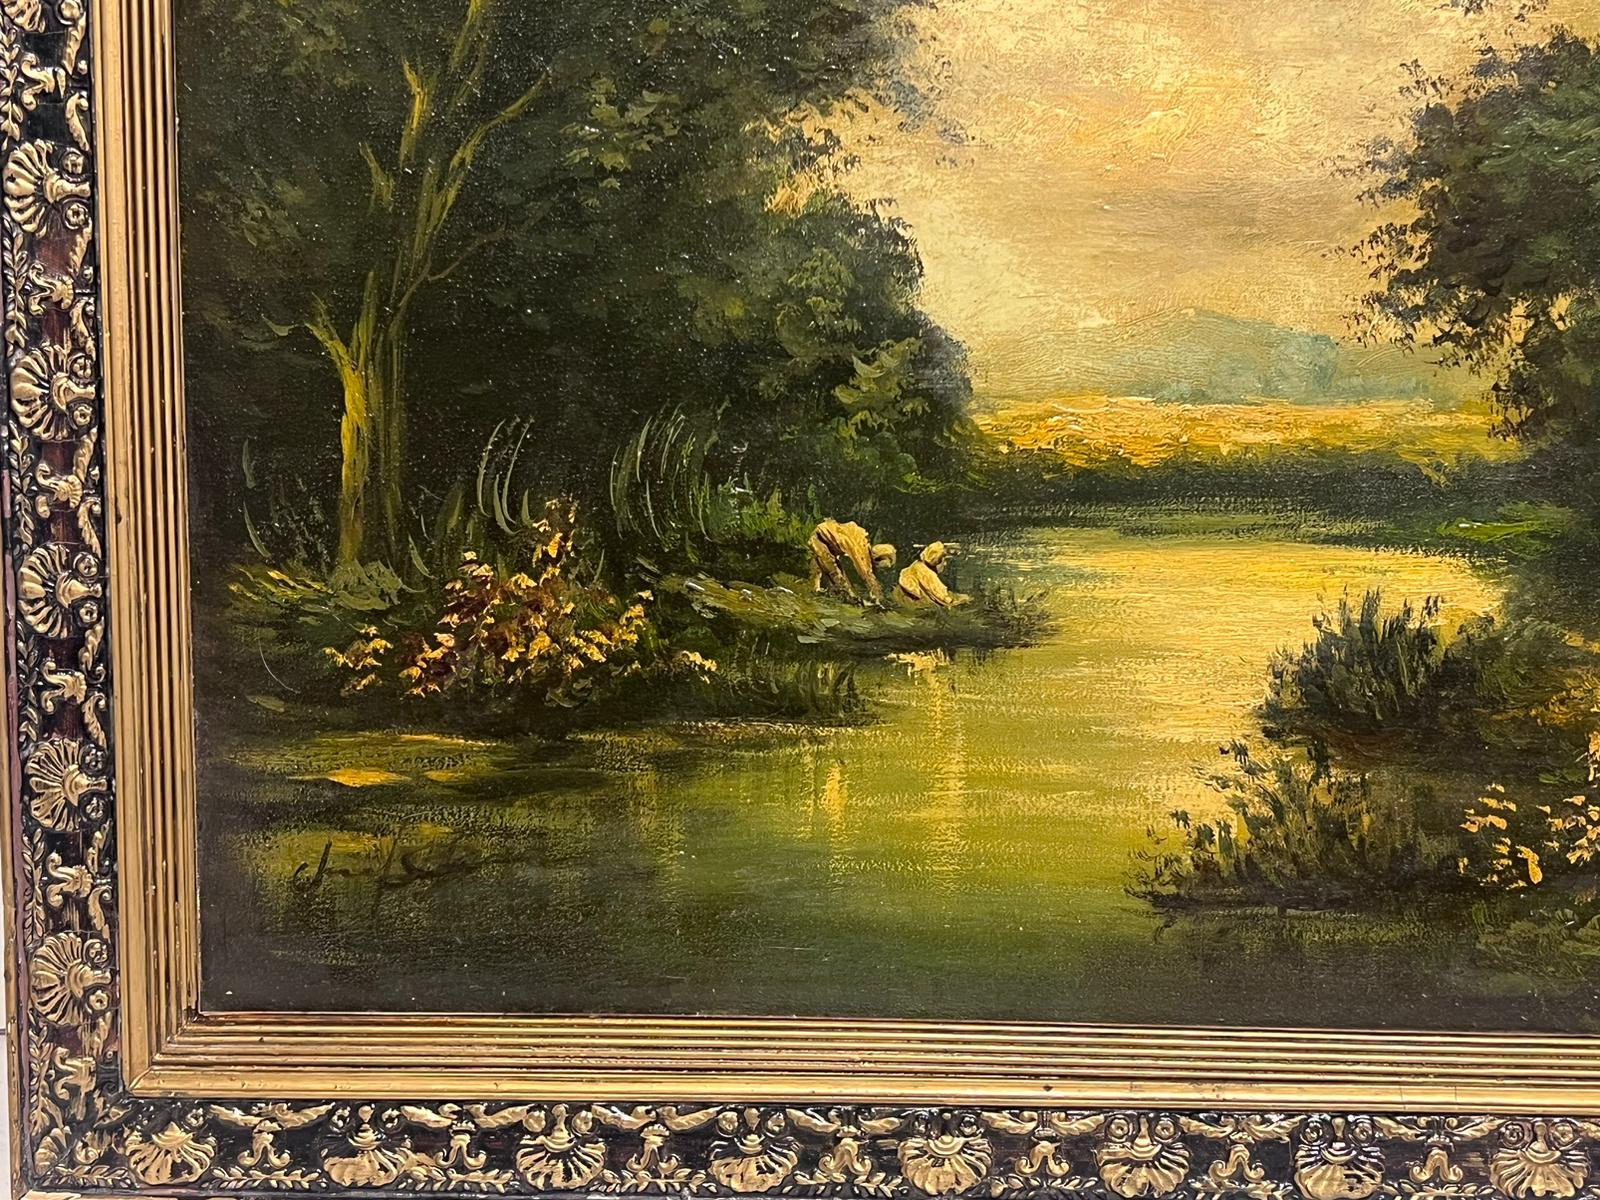 Bathers by Lake Vintage French Oil Painting in Gilt Frame - Black Figurative Painting by French School